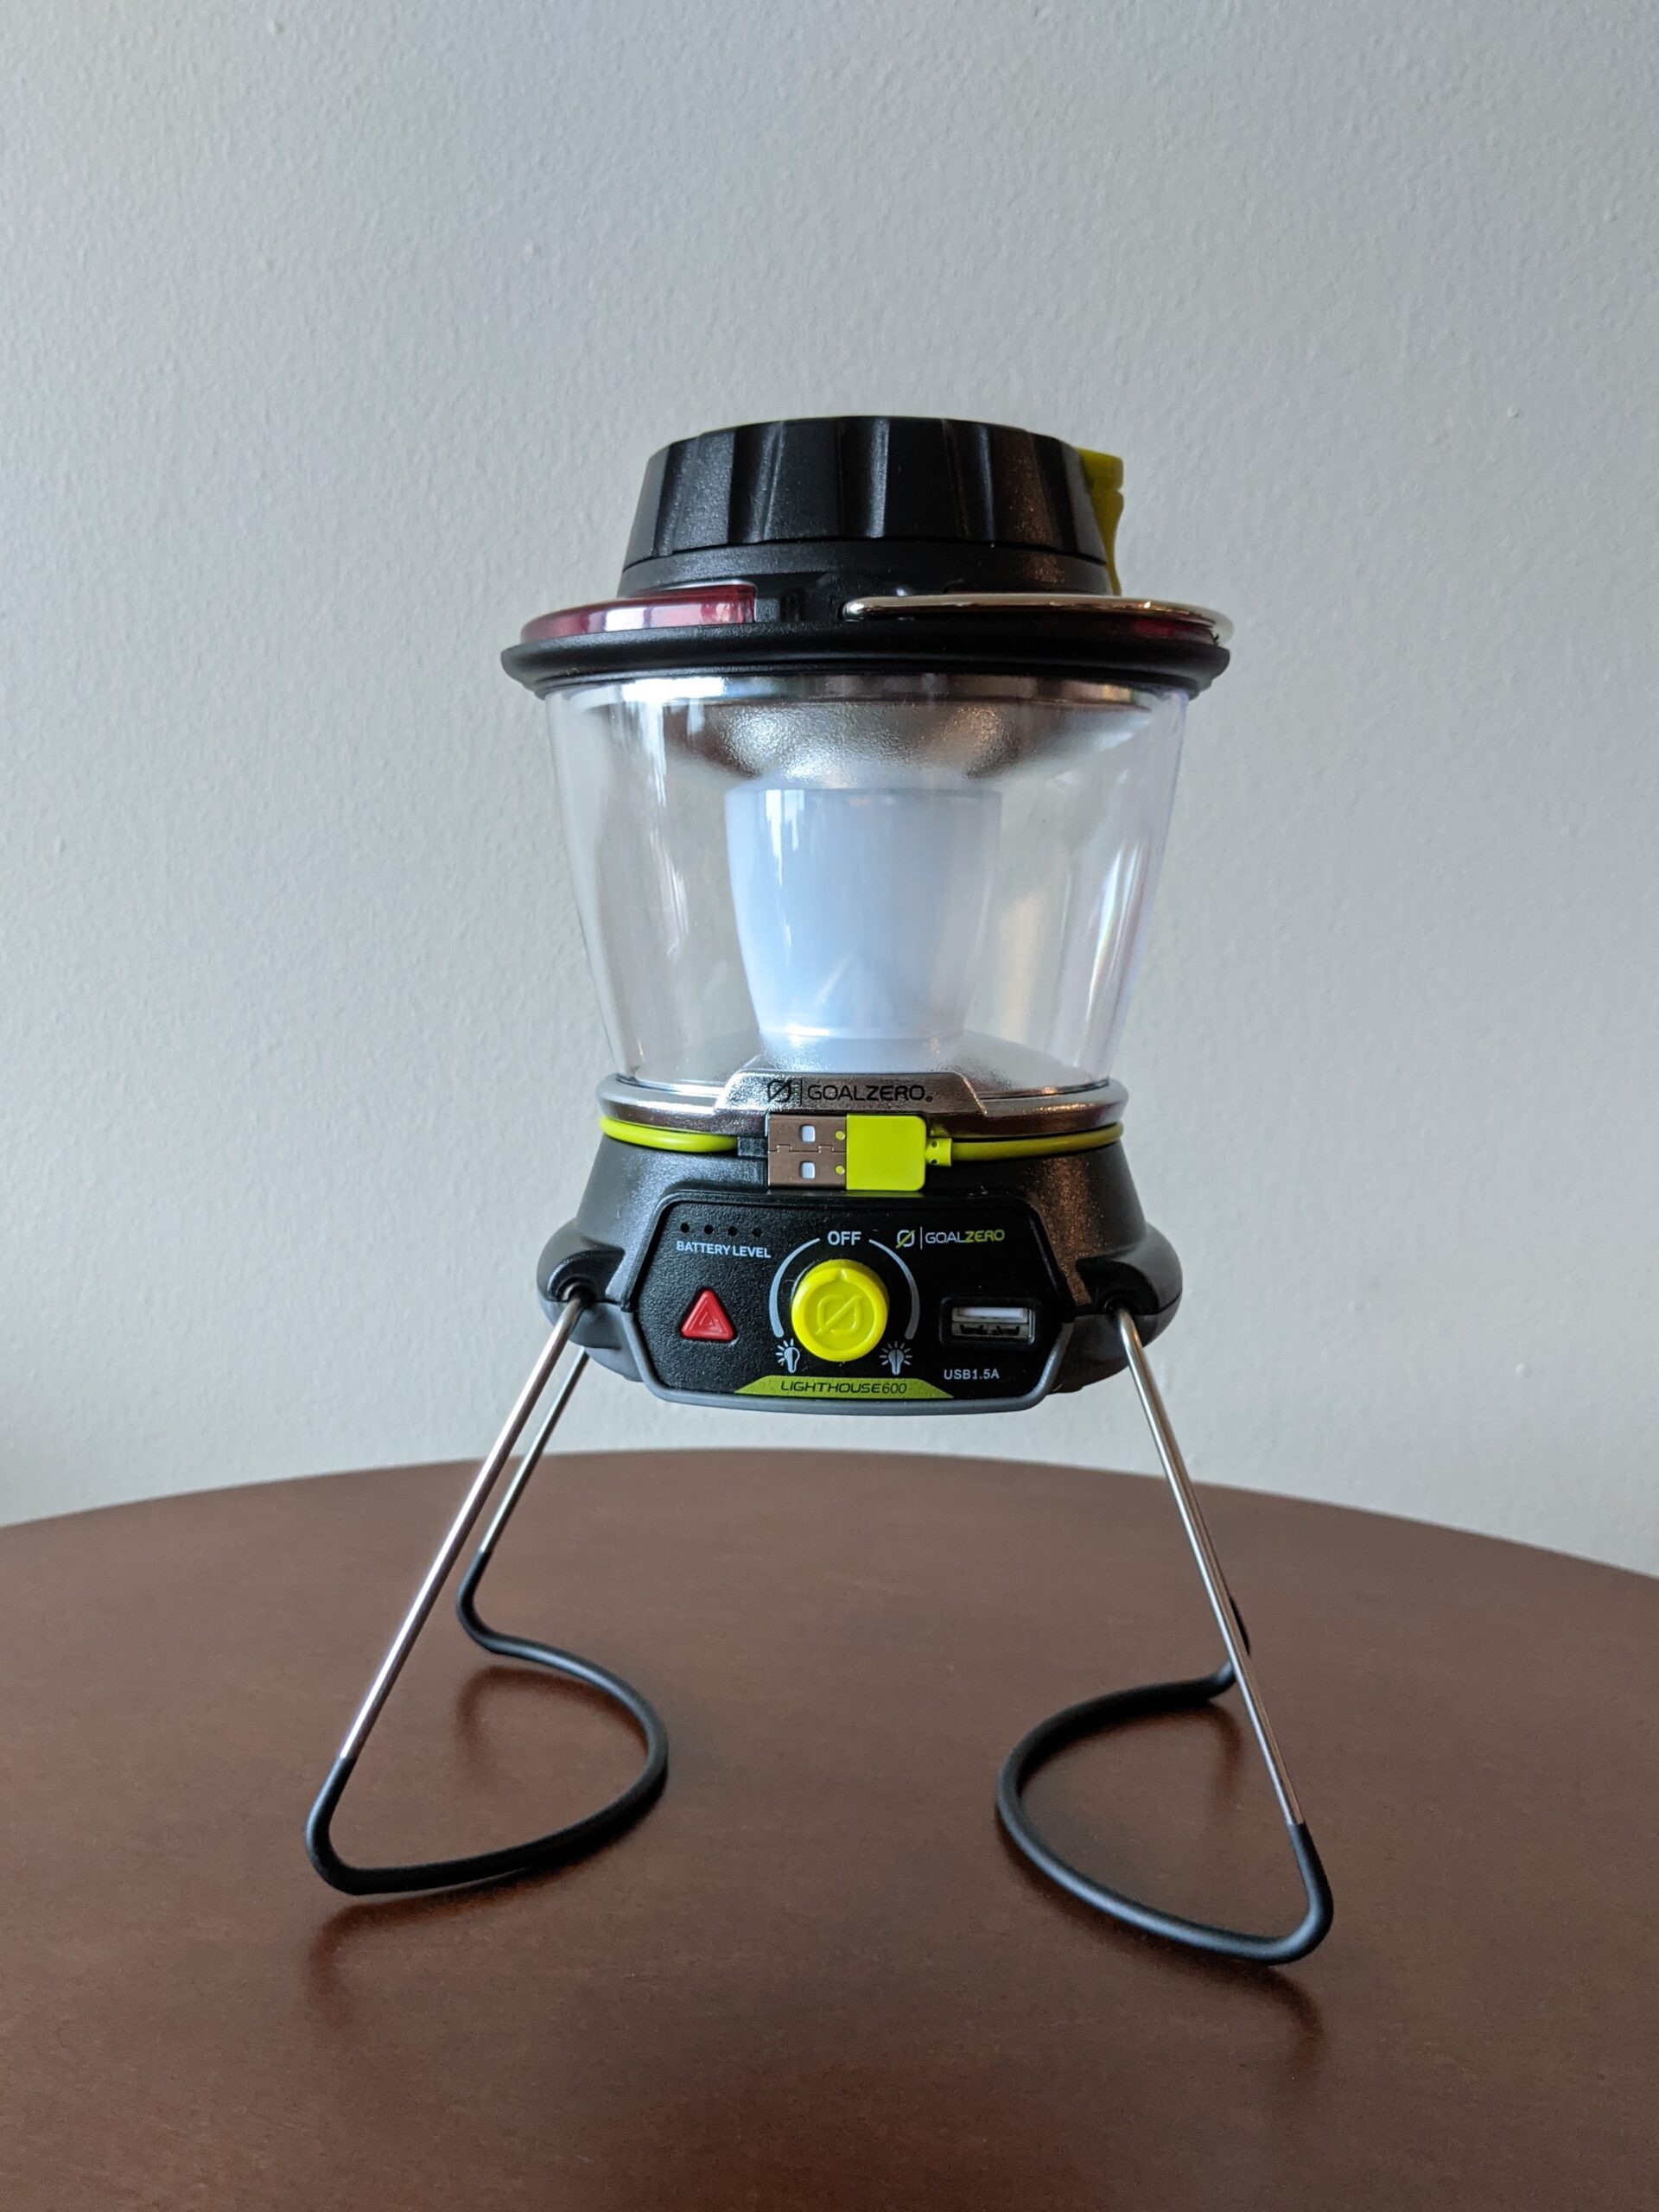 13 Best Camping Lanterns for the Great Outdoors, 2023